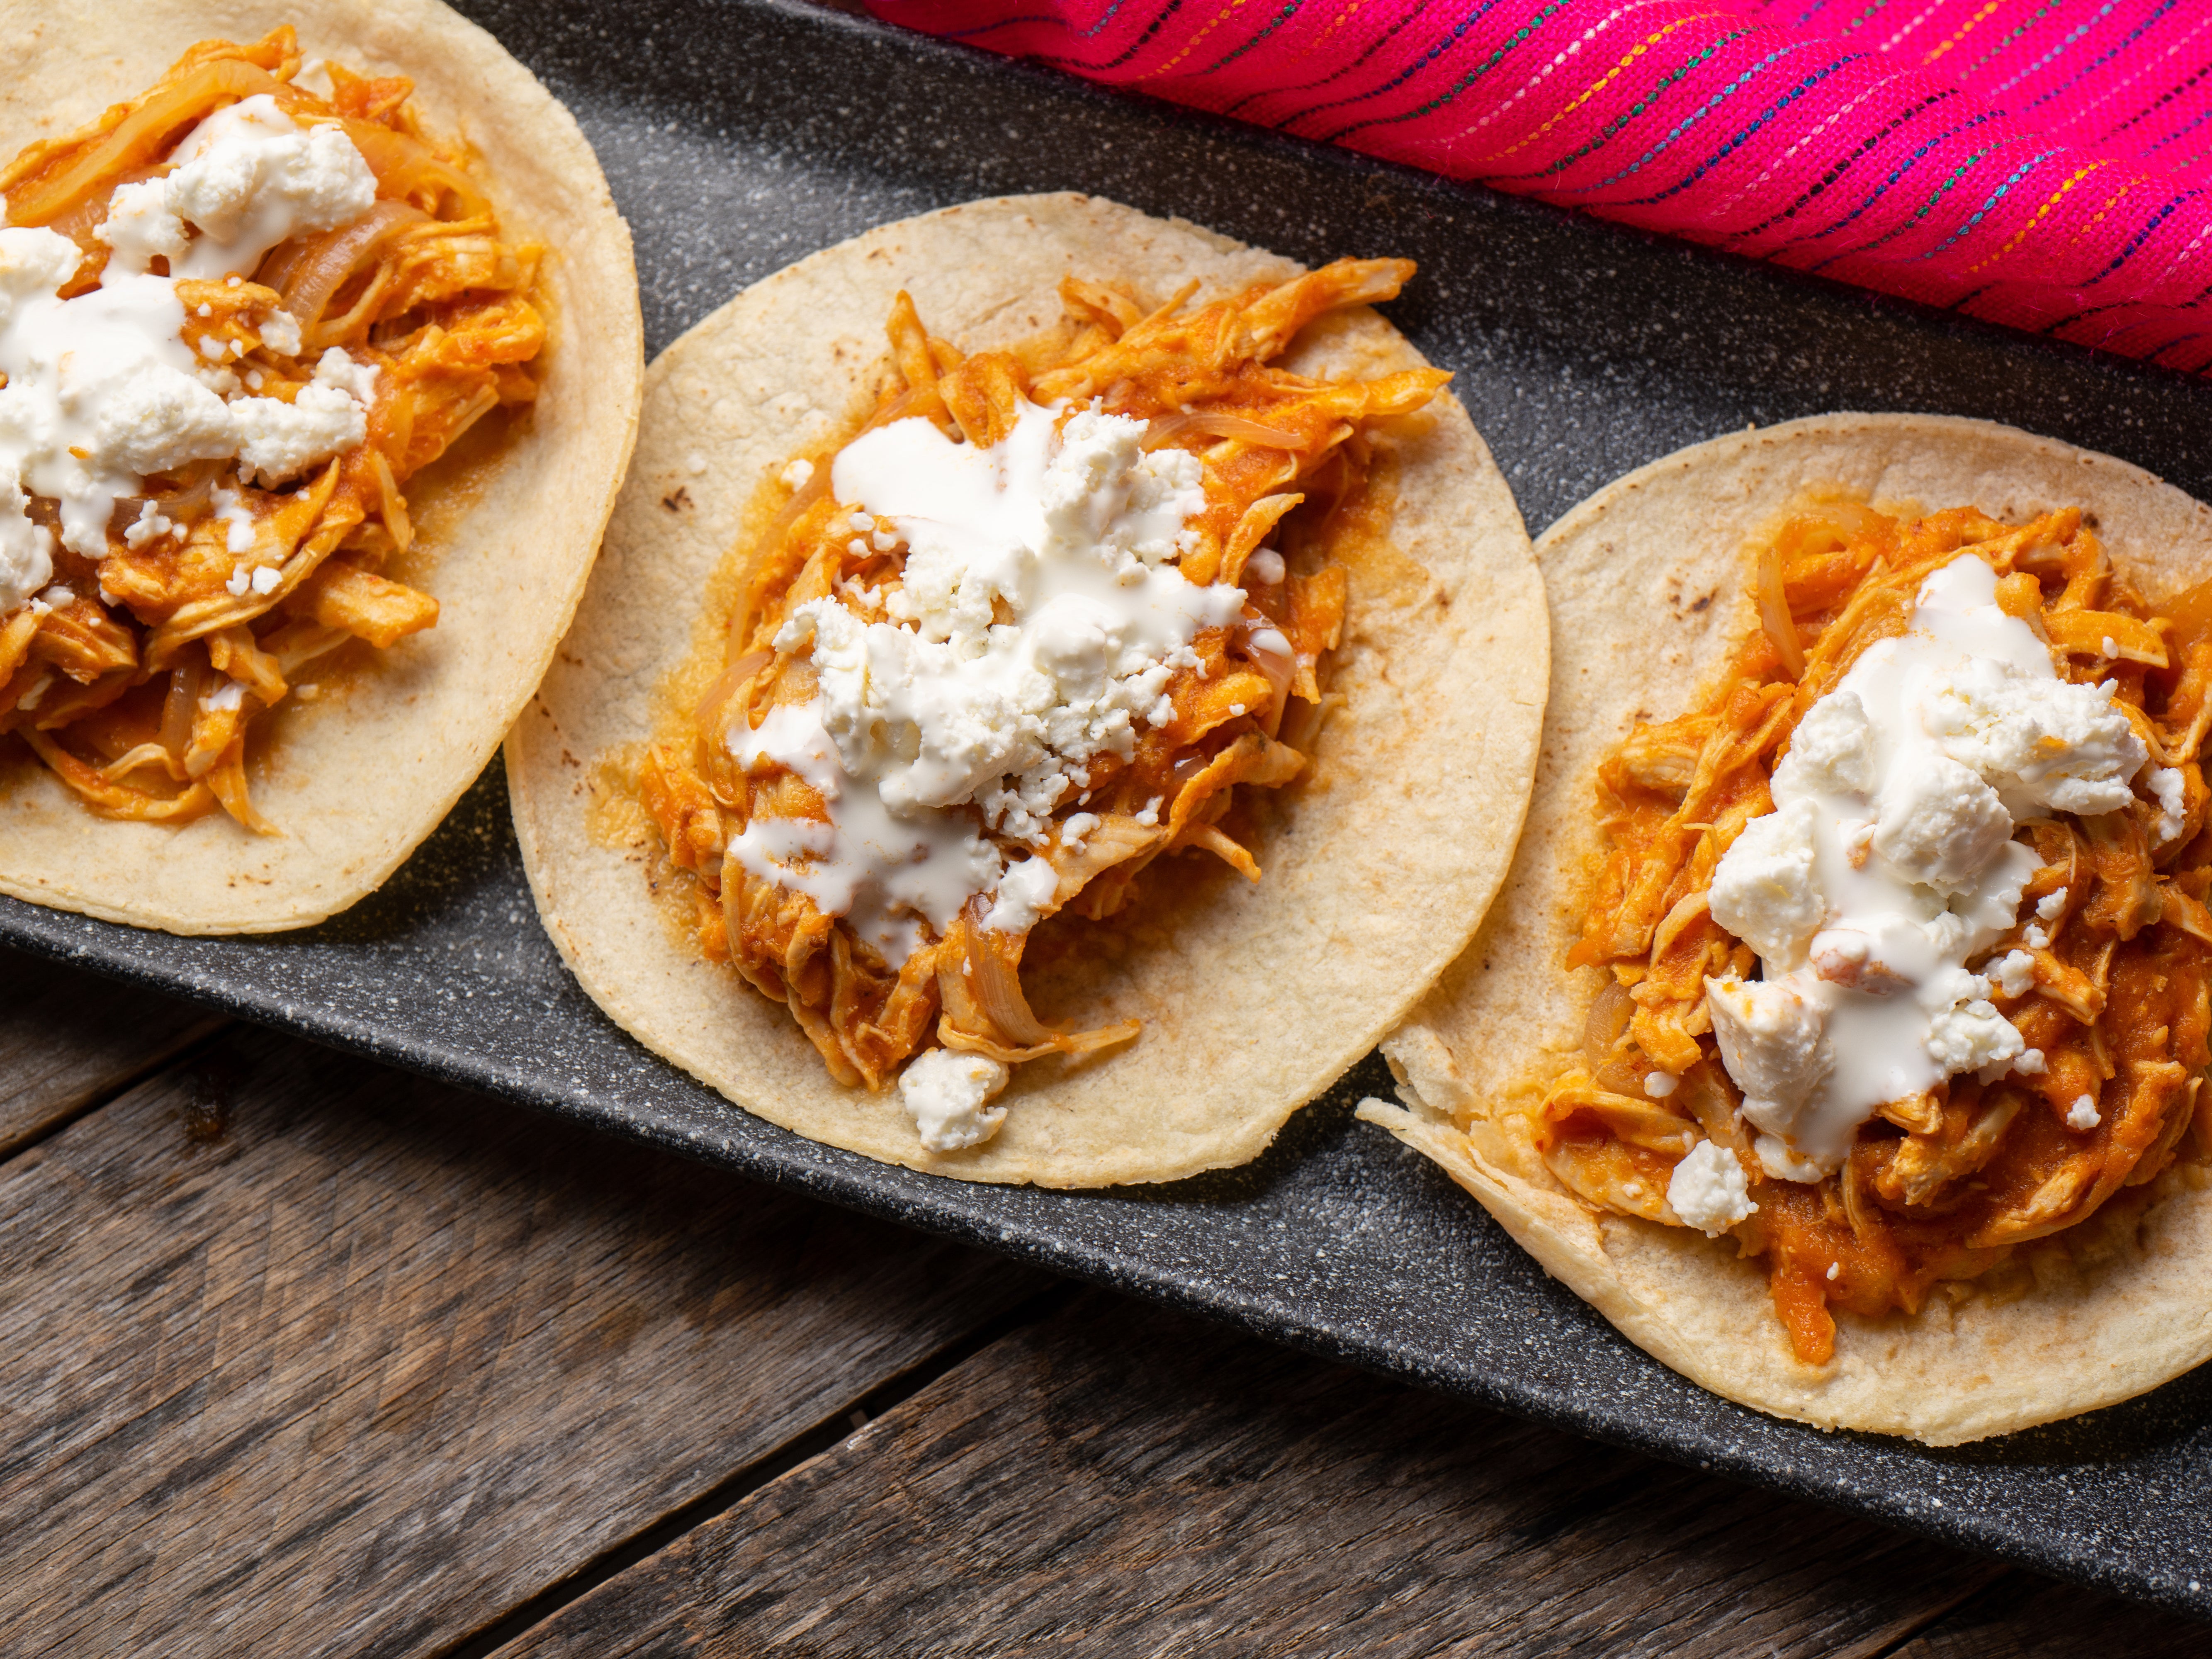 Chicken tinga tacos are affordable and versatile